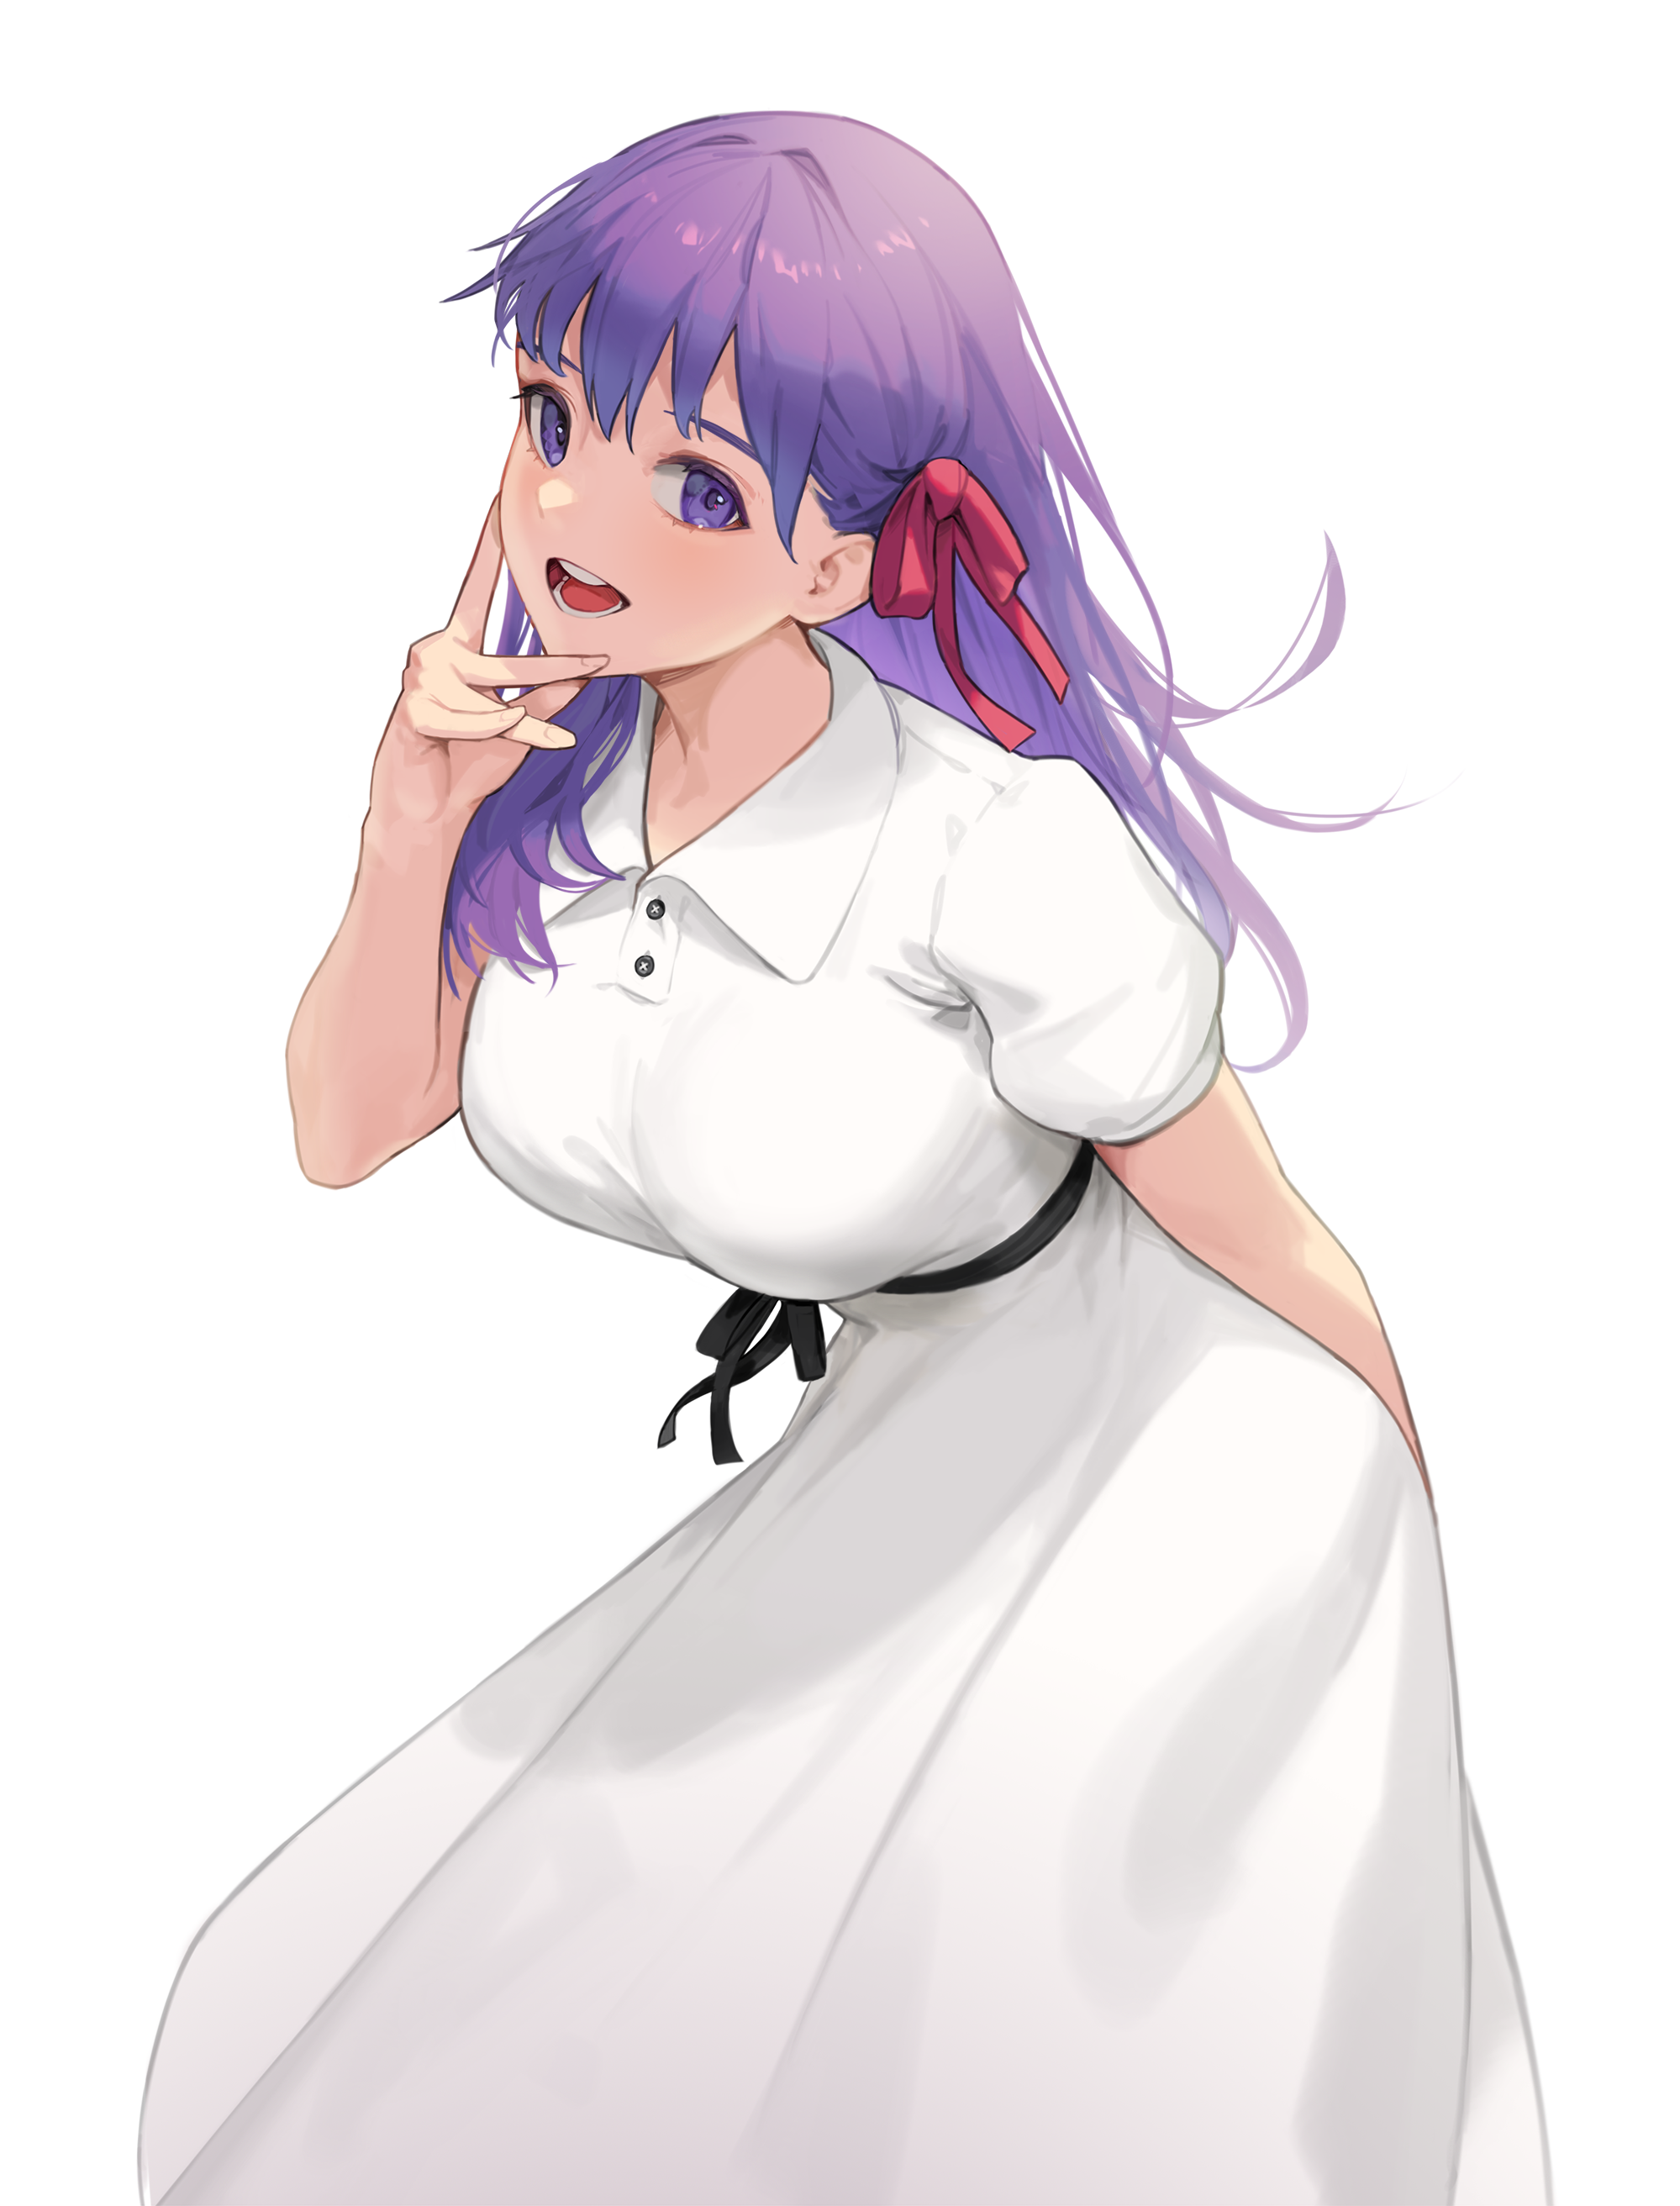 Fate Stay Night Fate Series Fate Stay Night Heavens Feel White Dress Open Mouth Blushing Looking At  1999x2625